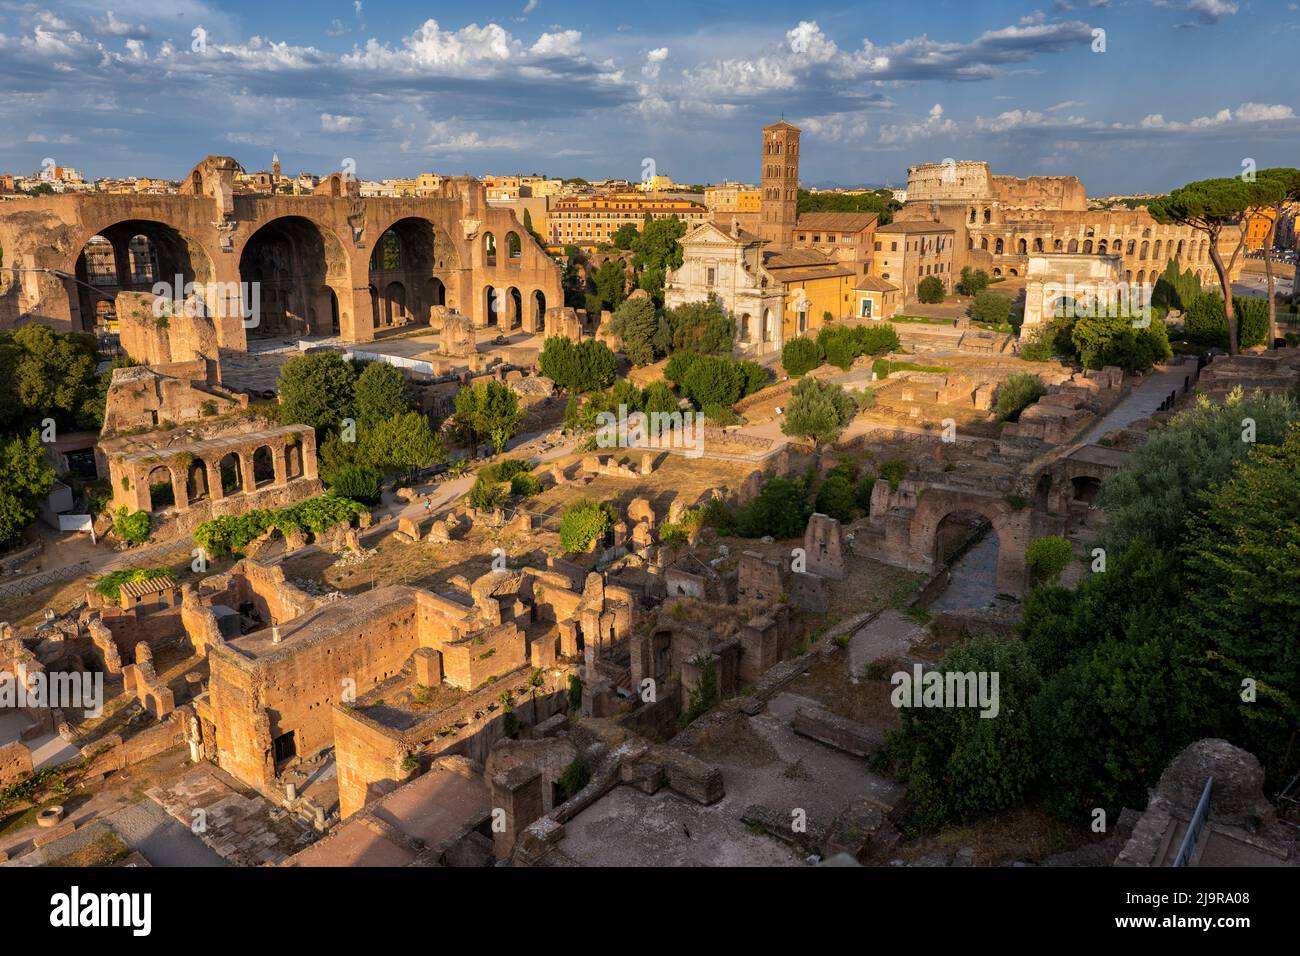 Sunset above the ancient ruins of the Roman Forum in city of Rome, Italy. Stock Photo